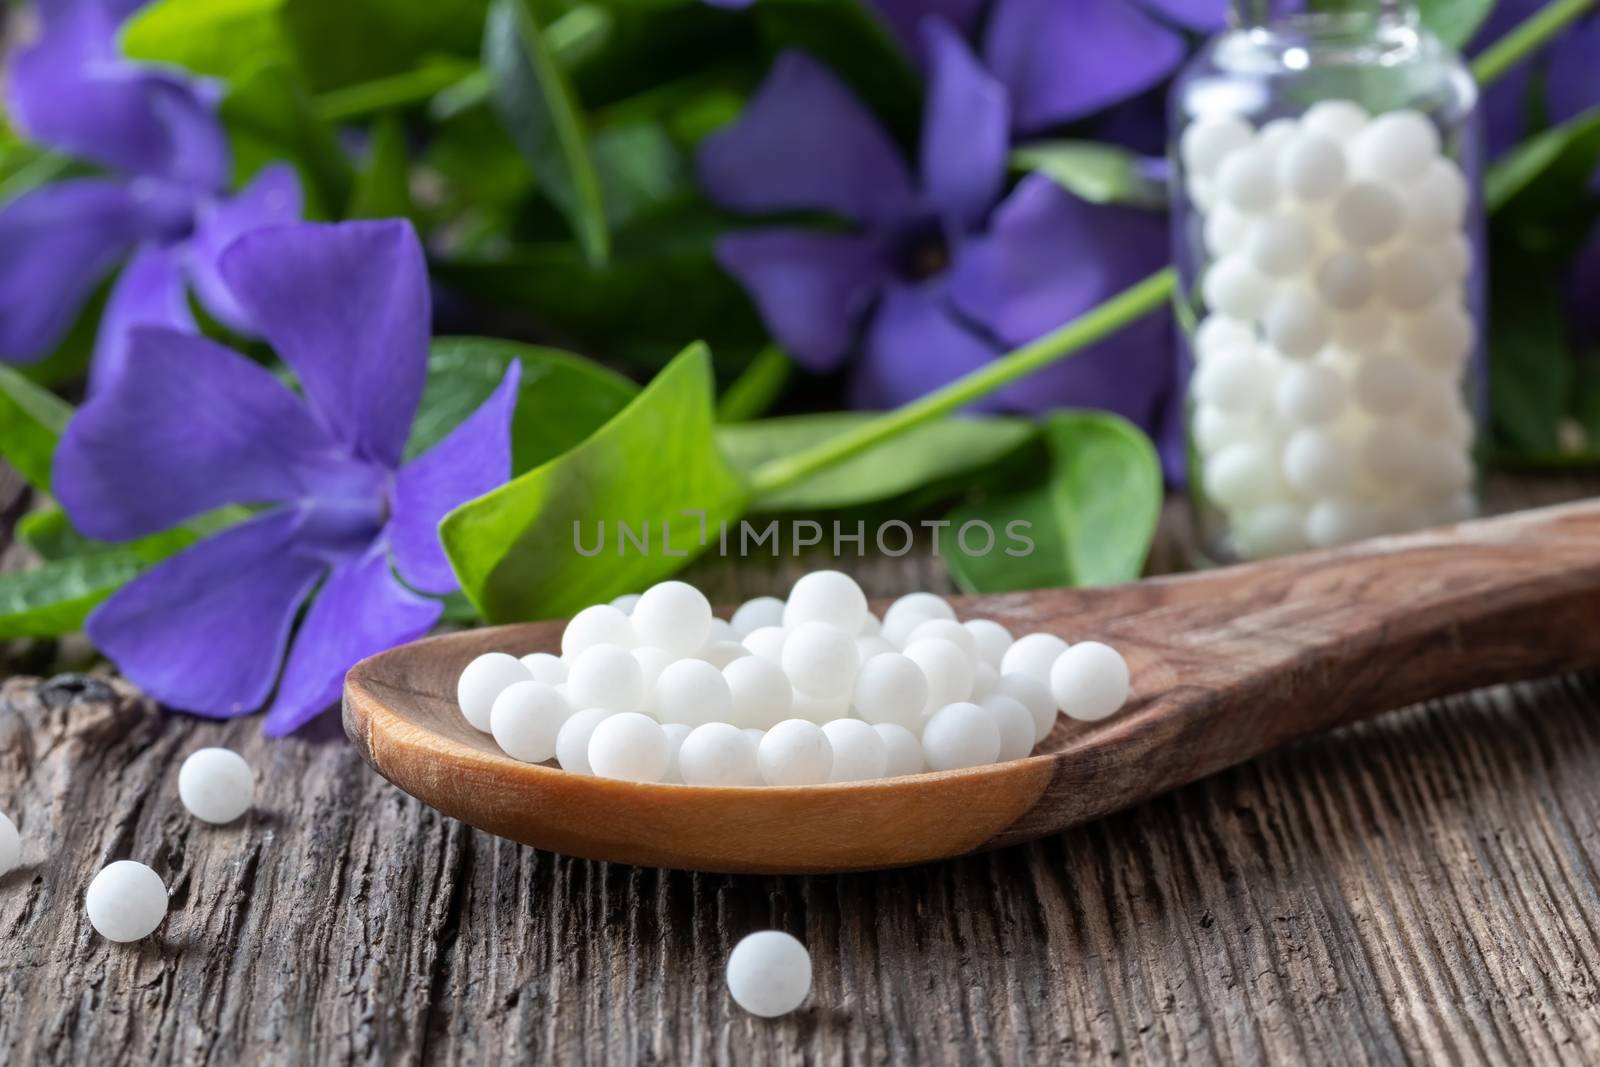 Homeopathic pills on a spoon with fresh Vinca minor plant in the background